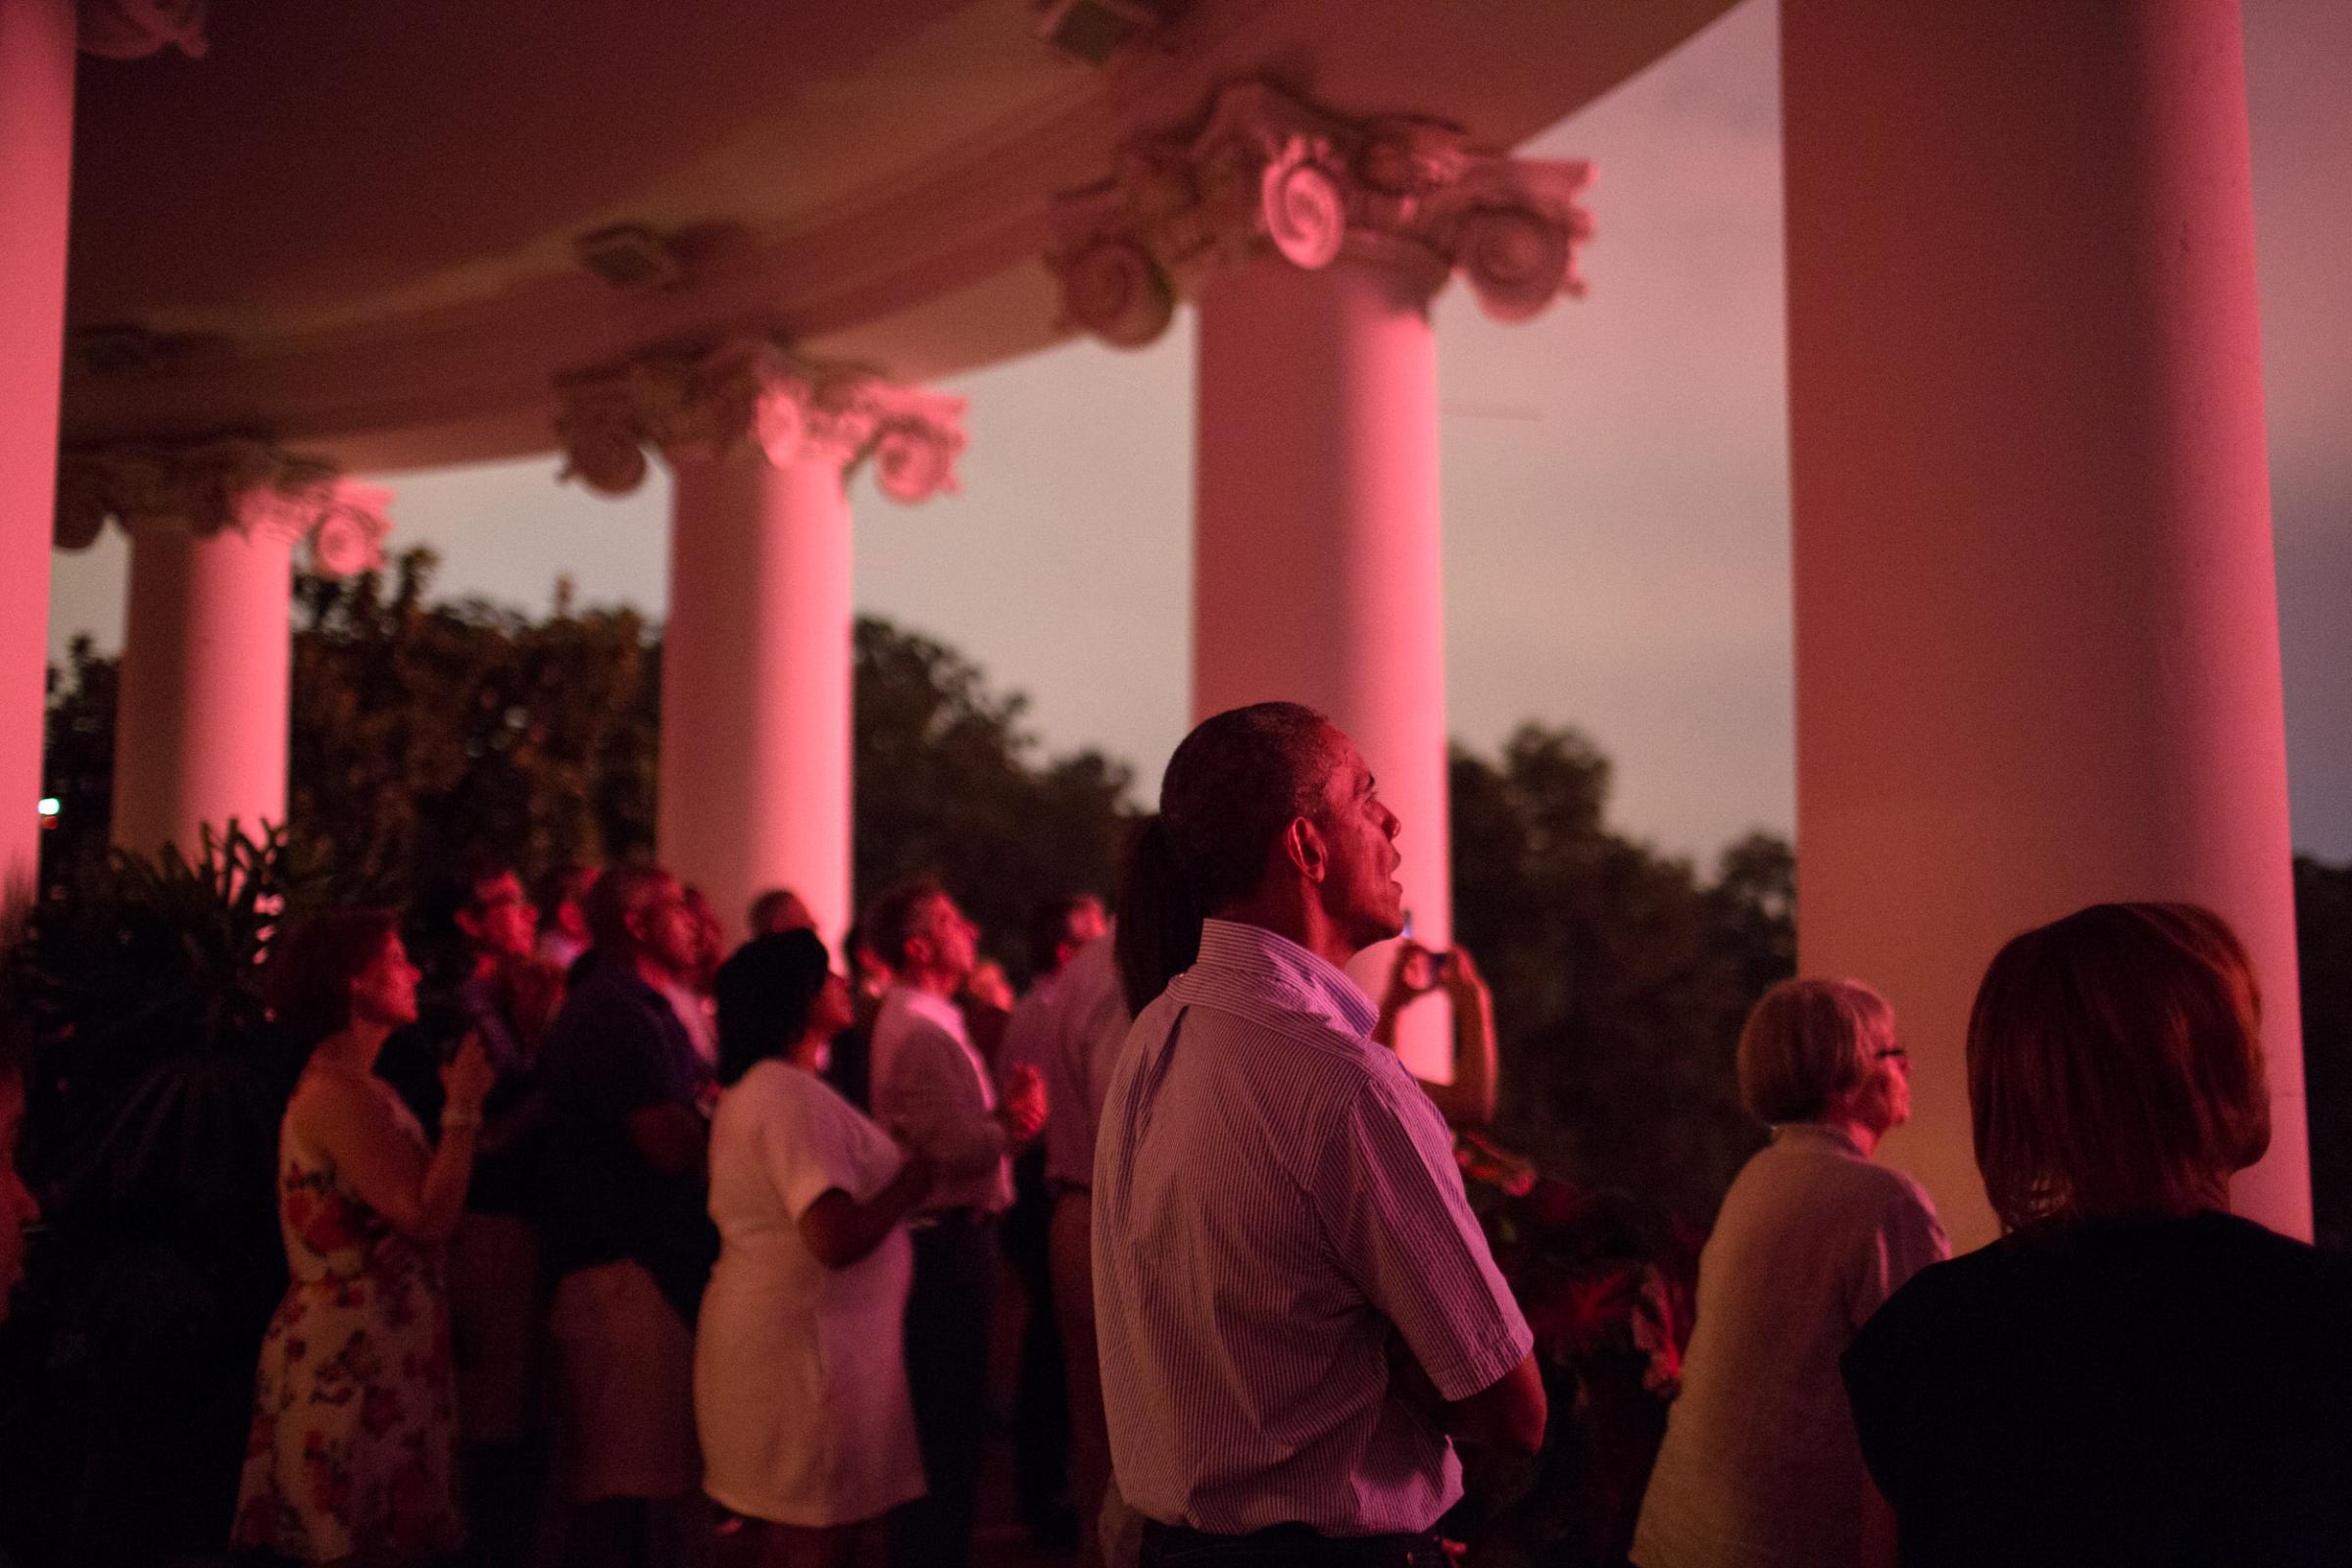 President Barack Obama, First Lady Michelle Obama, daughters Sasha and Malia, and family and friends watch the Fourth of July fireworks from the Truman Balcony of the White House, Saturday, July 4, 2015. (Official White House Photo by Pete Souza)